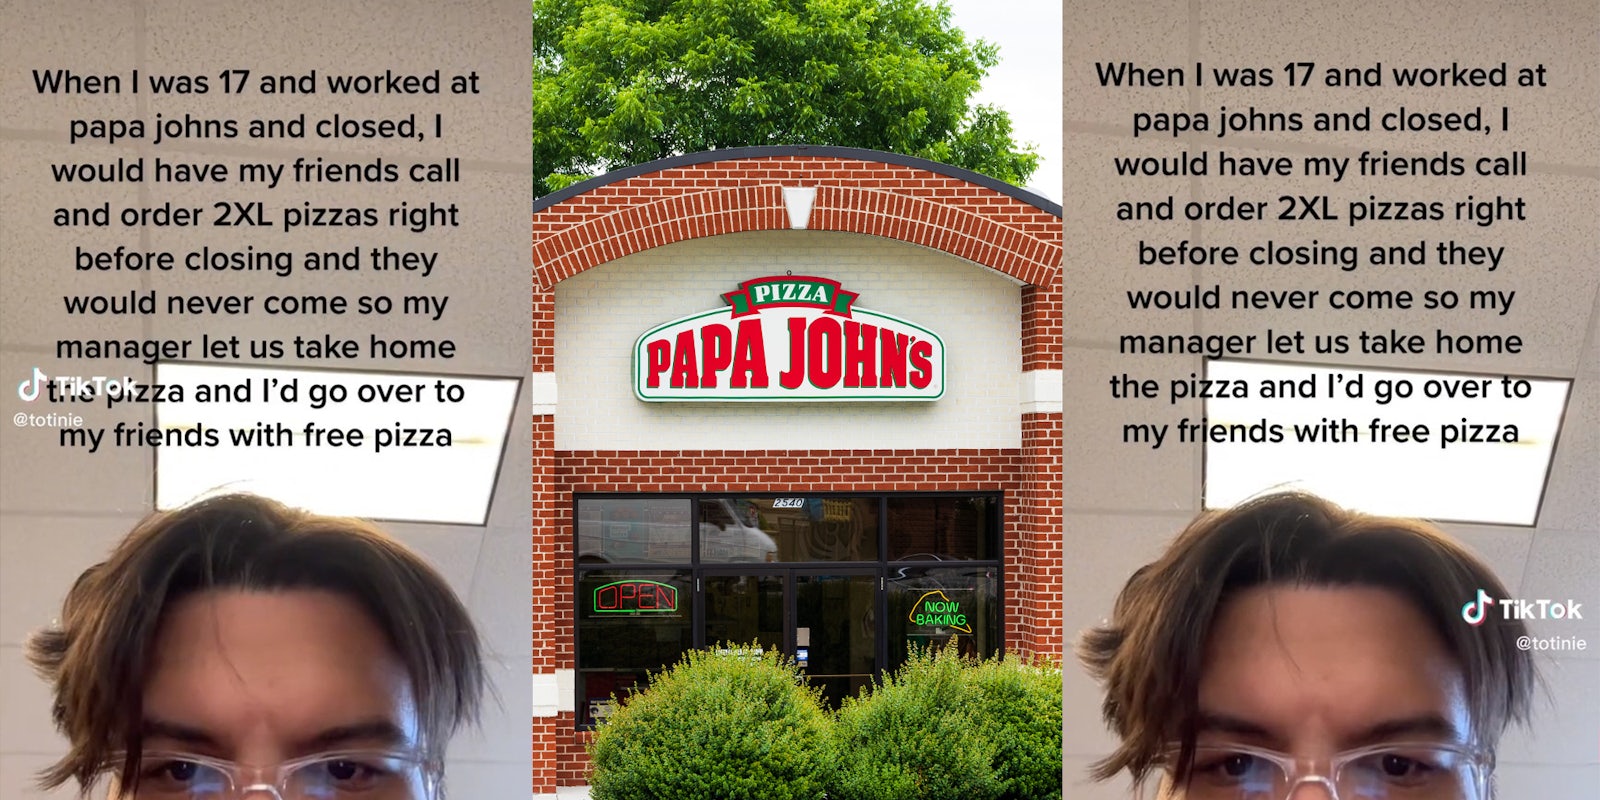 Former Papa John's worker confesses he got free pizza by asking friends to order before closing but then never picking them up